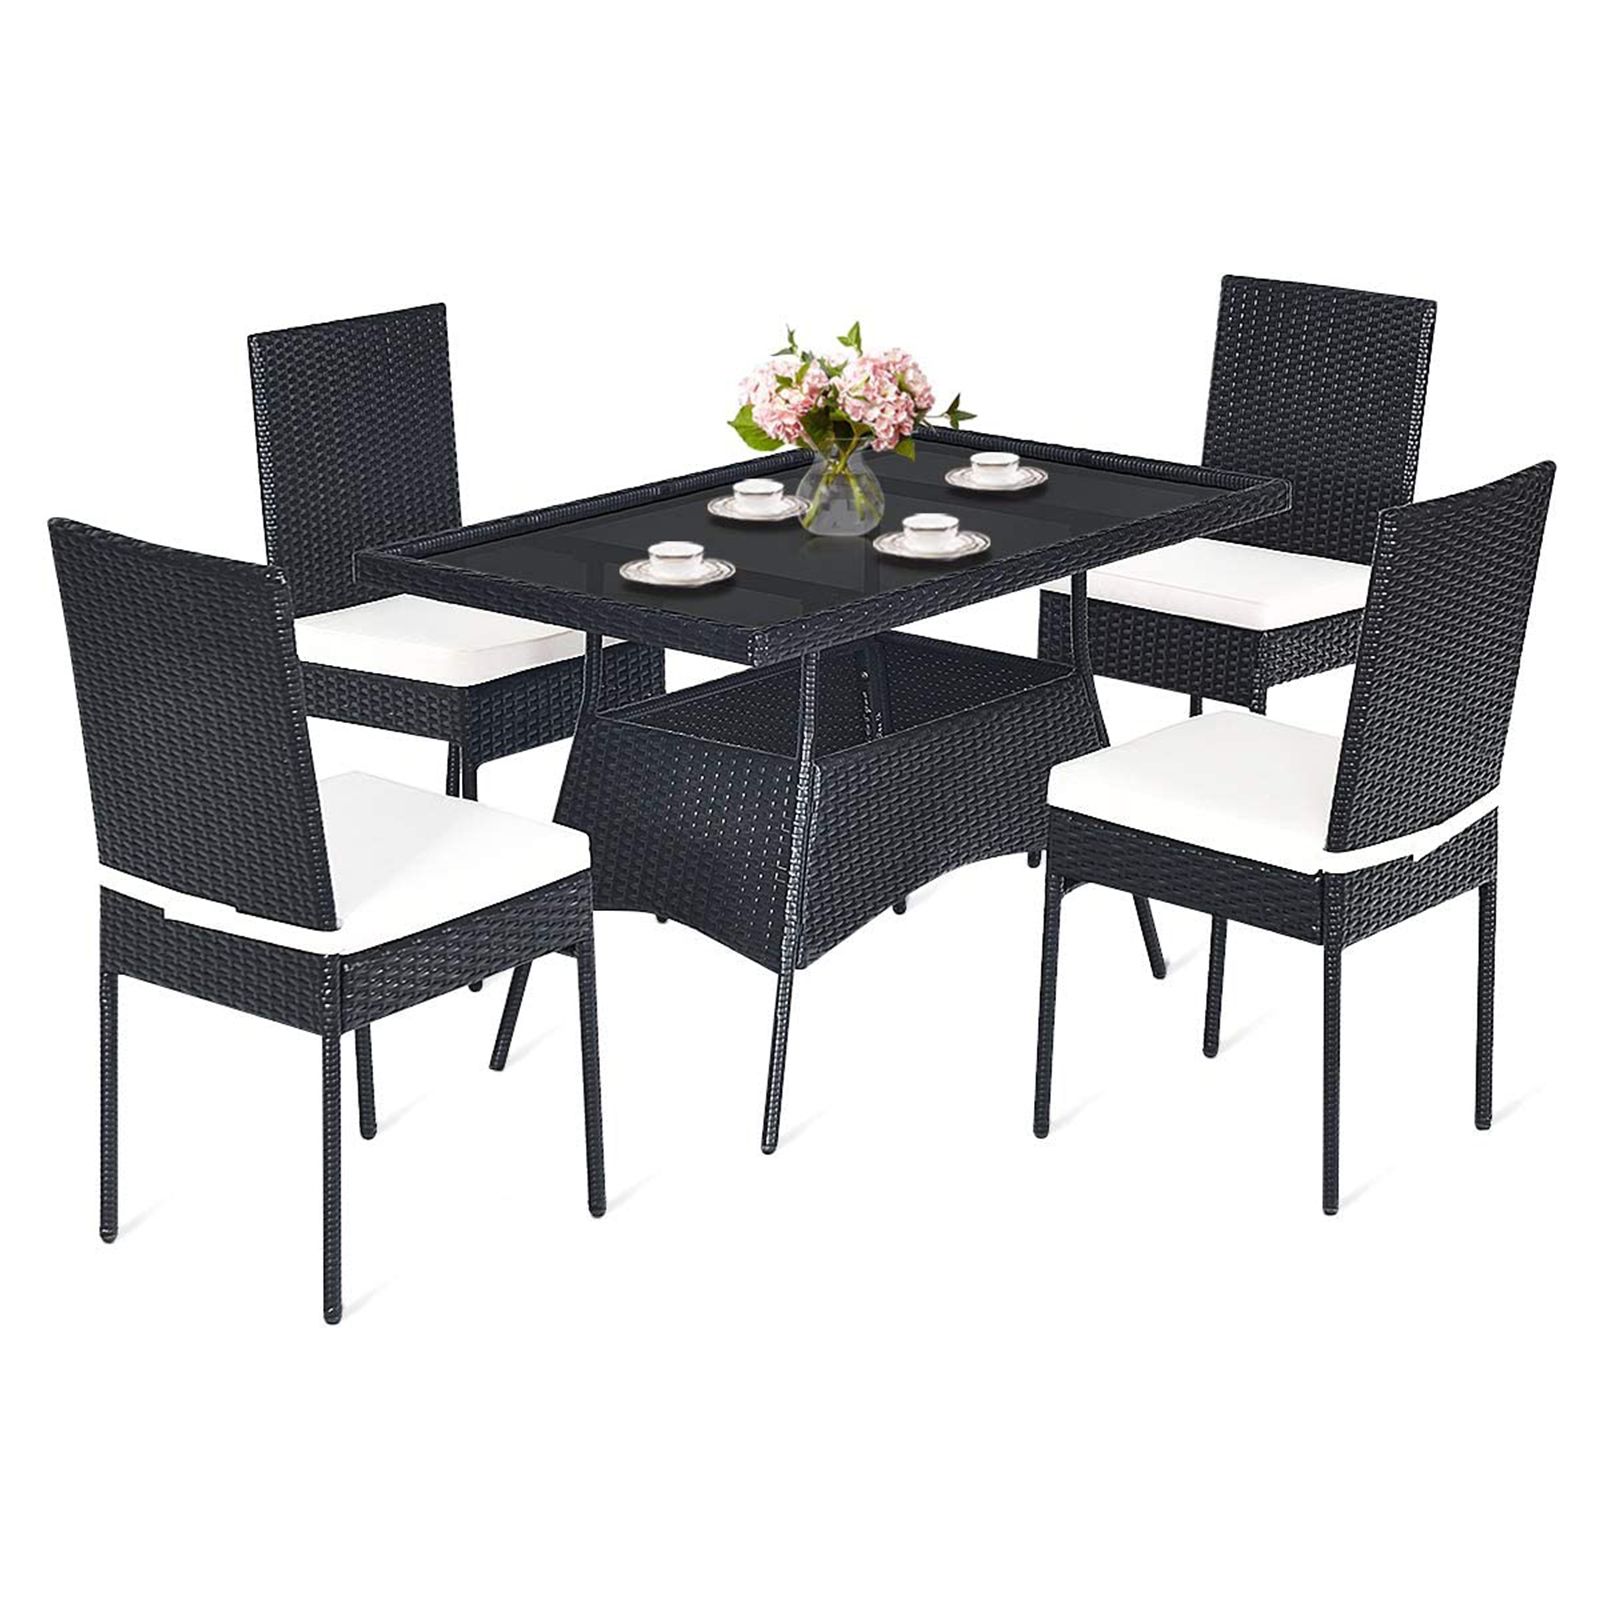 5-Piece Patio Rattan Dining Set with Tempered Glass Top and Removable Cushions